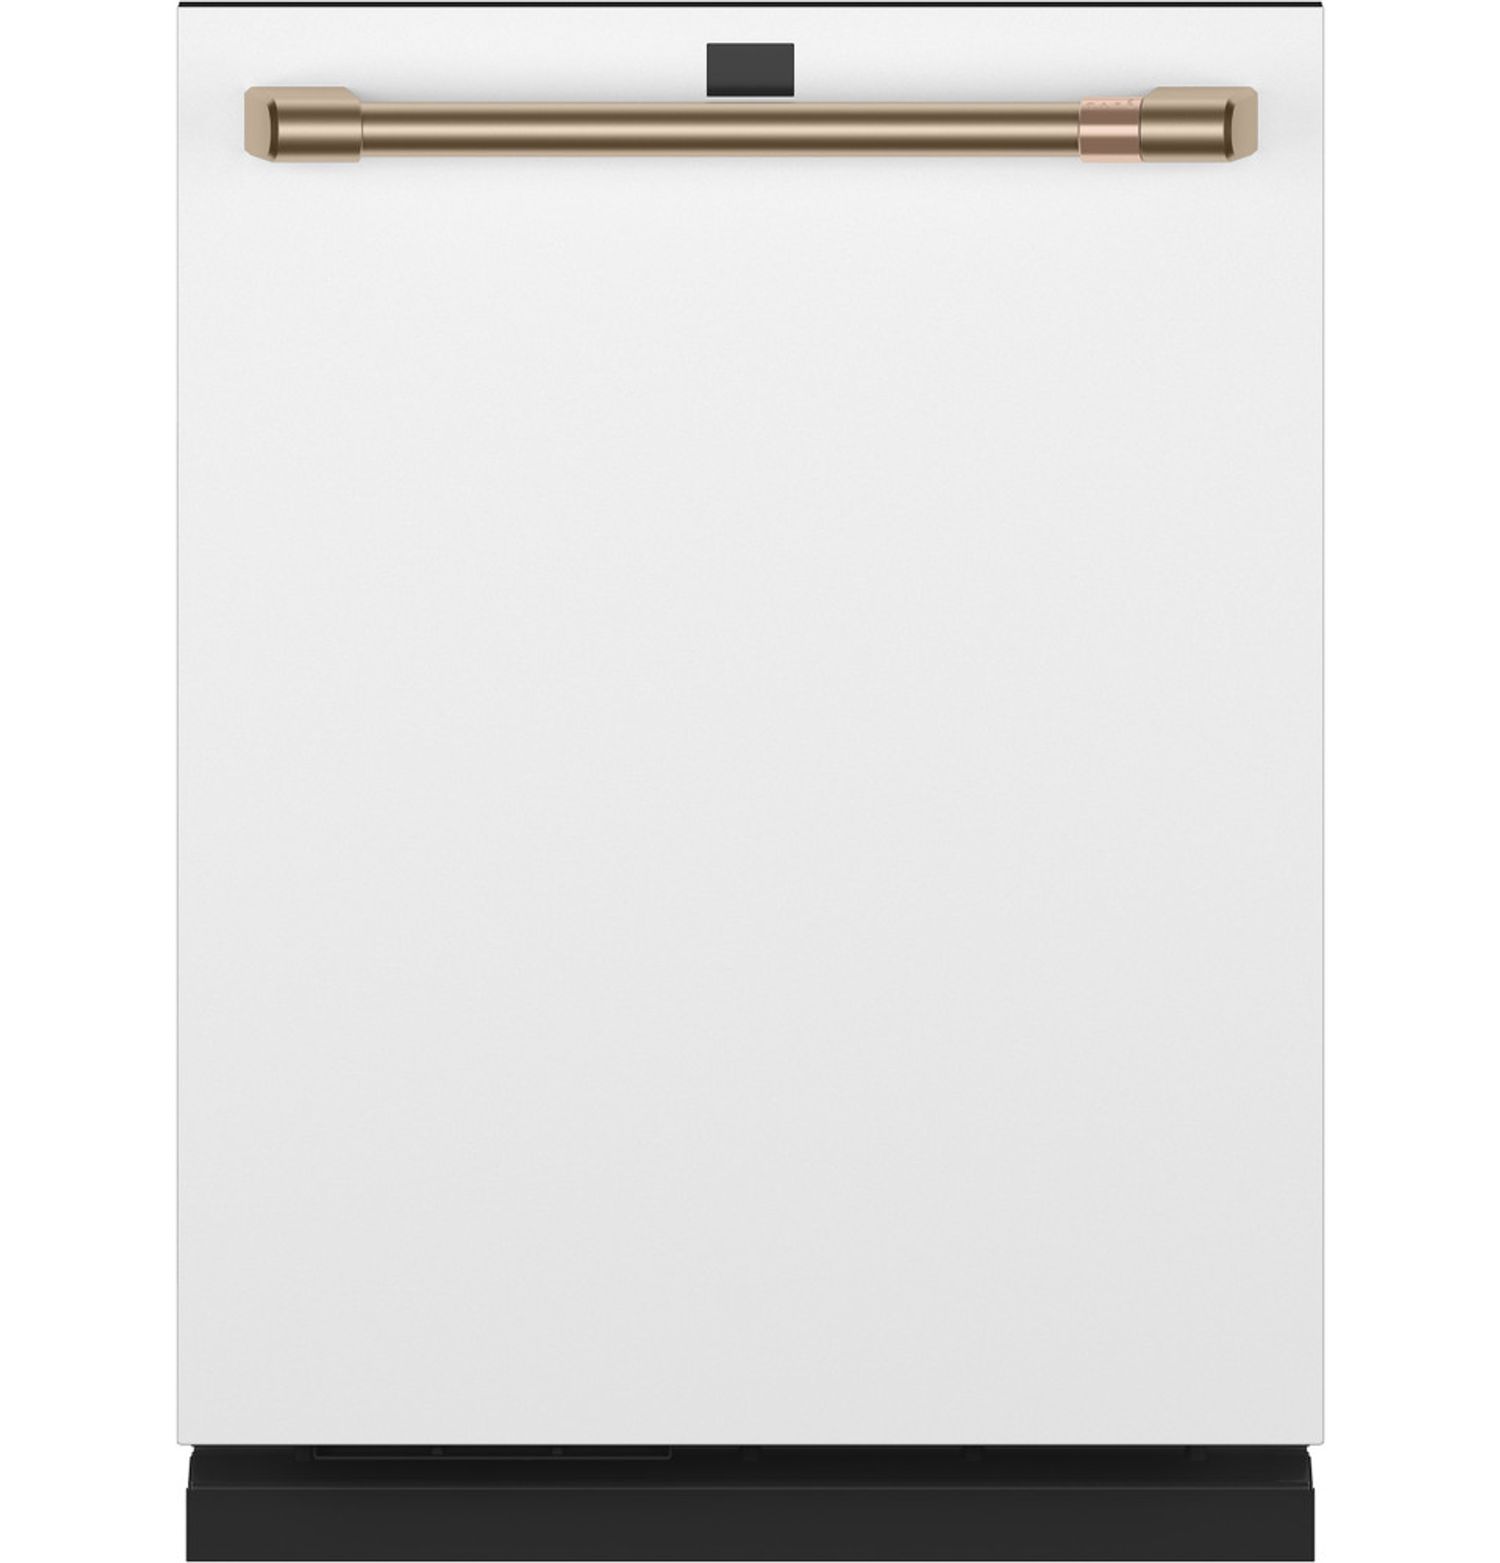 Shop Café Smart Stainless Steel Interior Dishwasher in Matte White with Brushed Bronze Hardware from Café on Openhaus